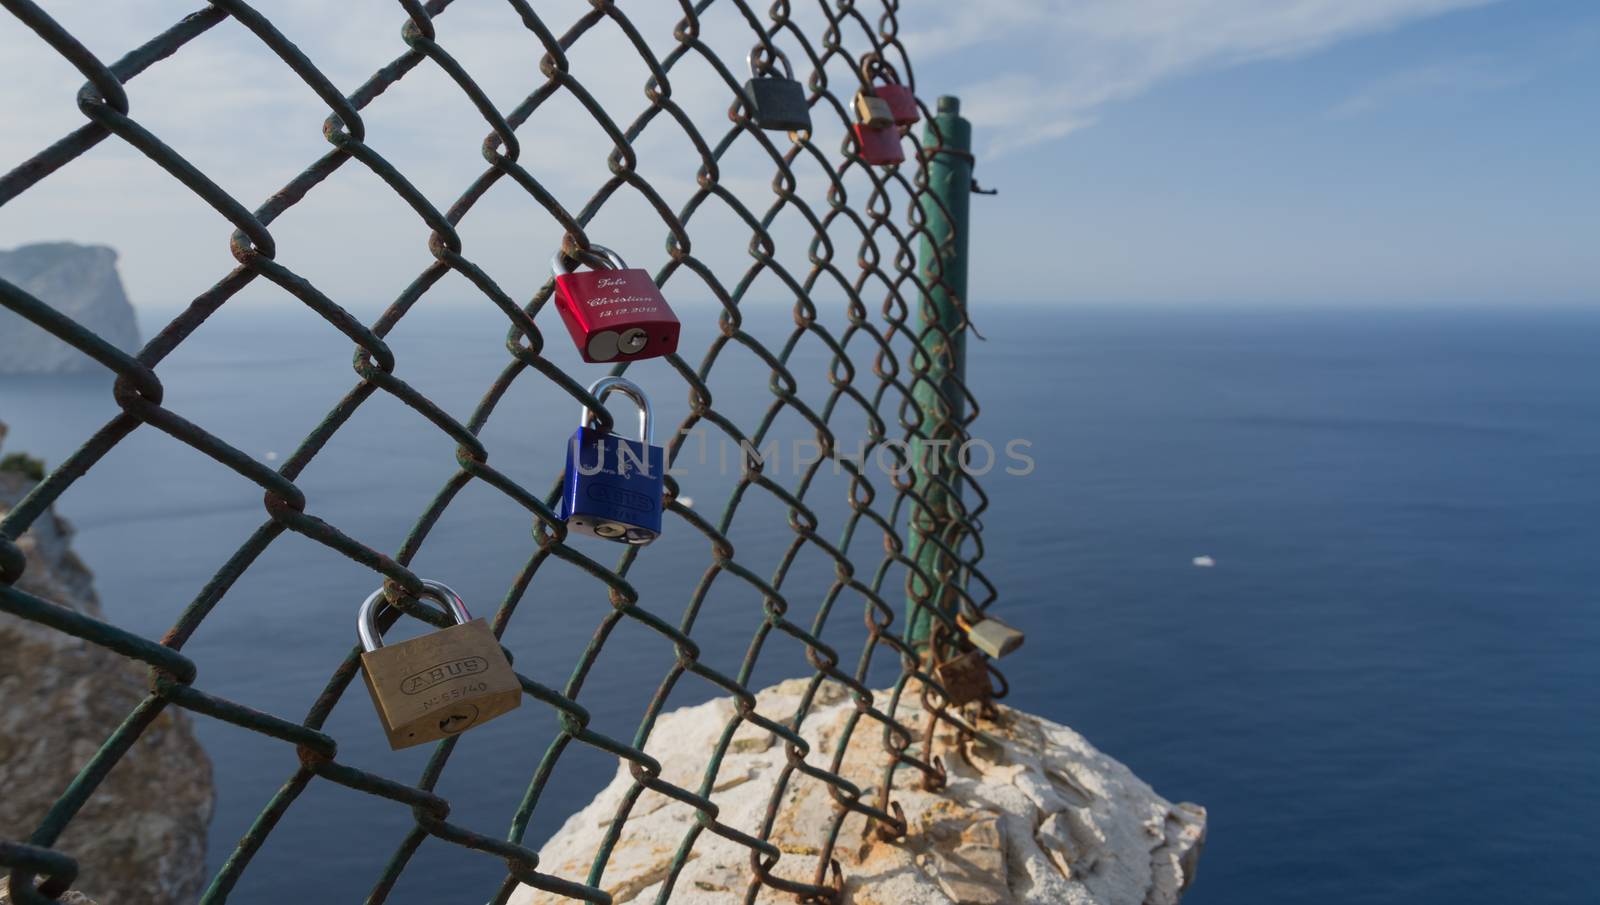 Padlocks on Formentor - couple in love have placed inscripted padlocks on the fence by the lighthouse as a symbol for their eternal love.